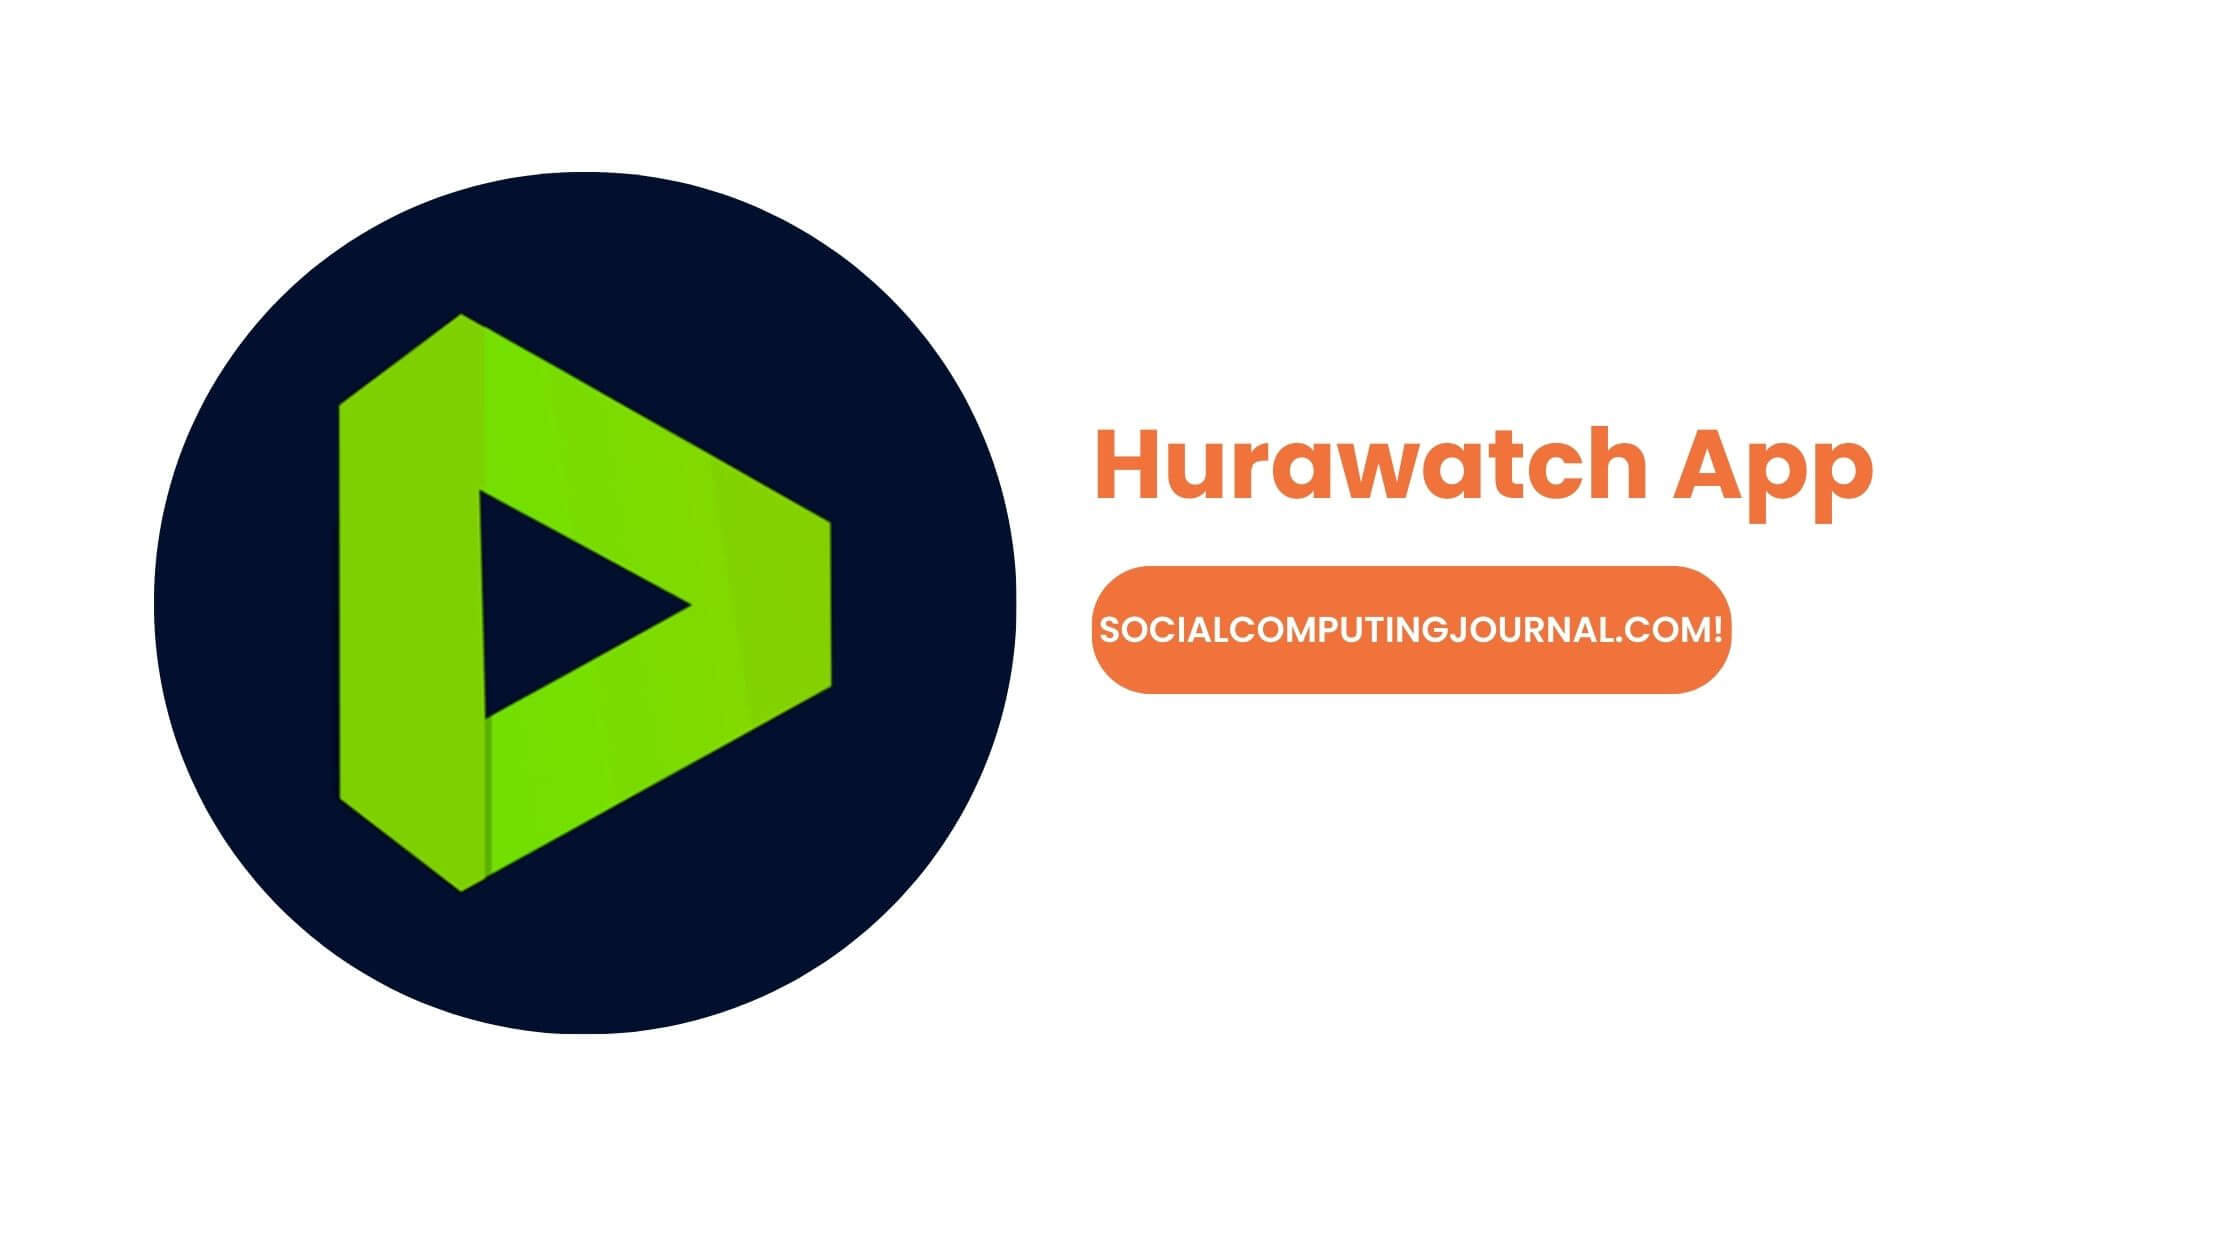 What is Hurawatch App